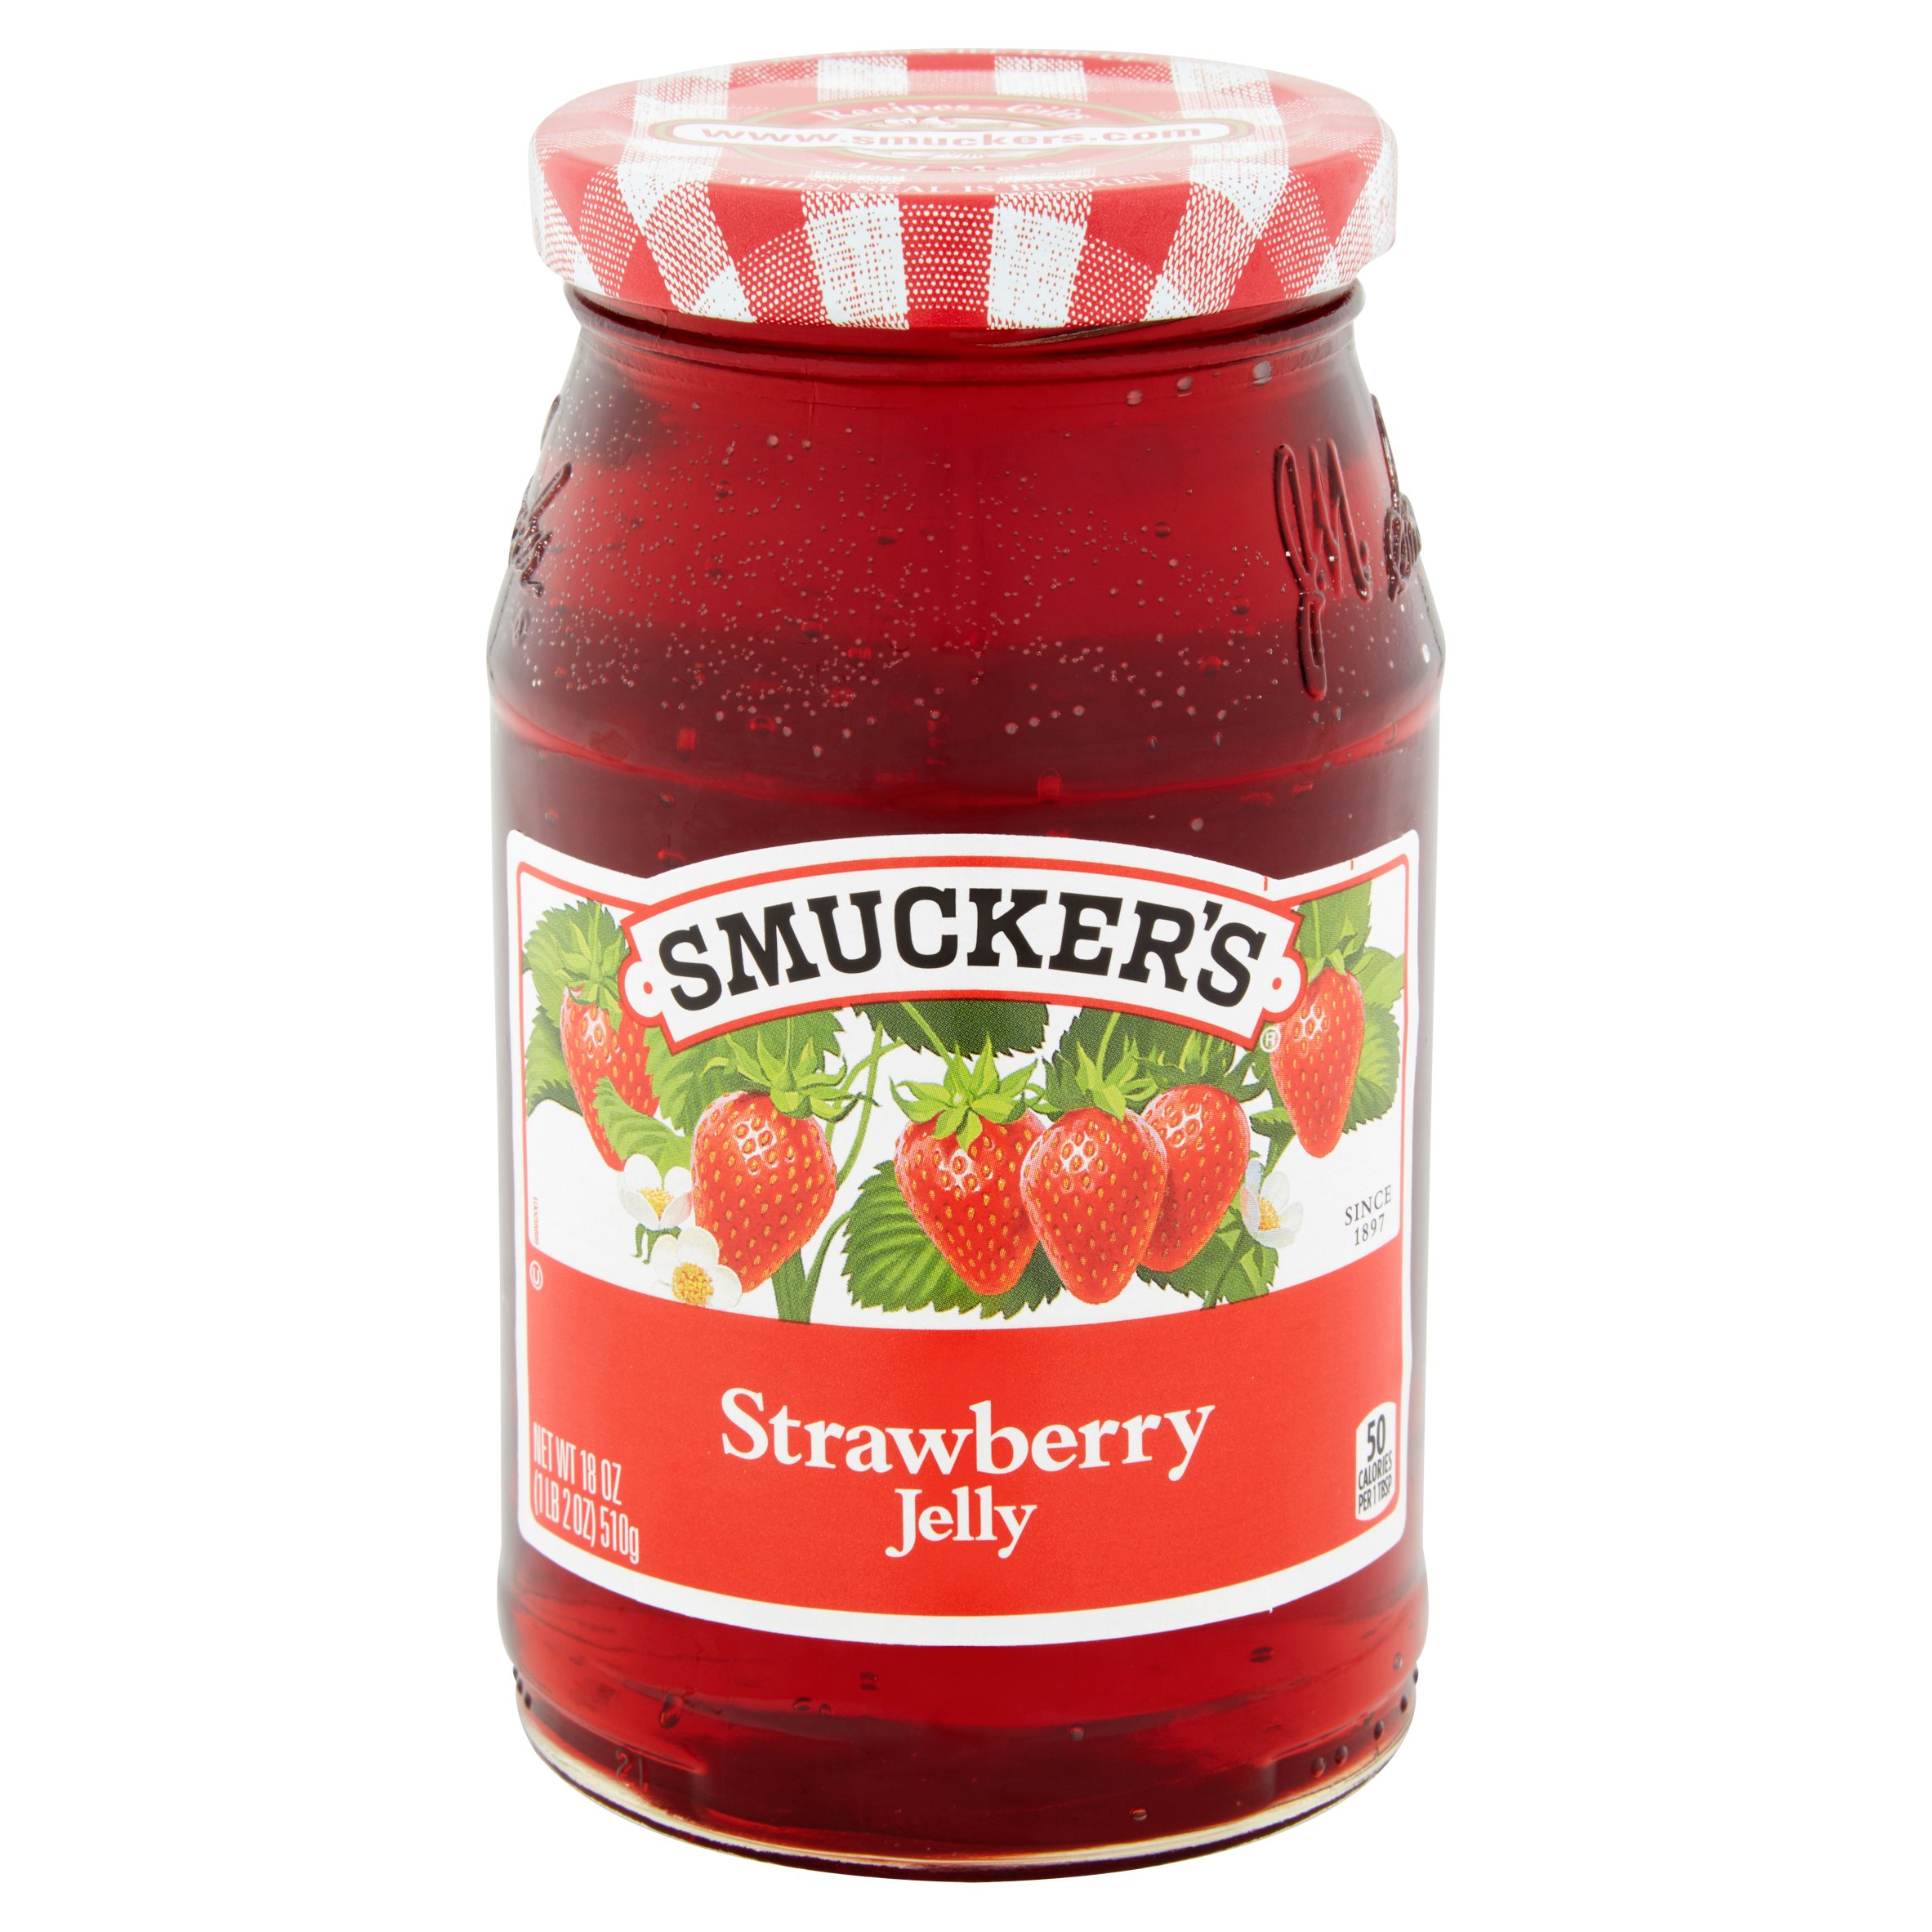 1495776535-smuckers-straw-jelly.jpeg